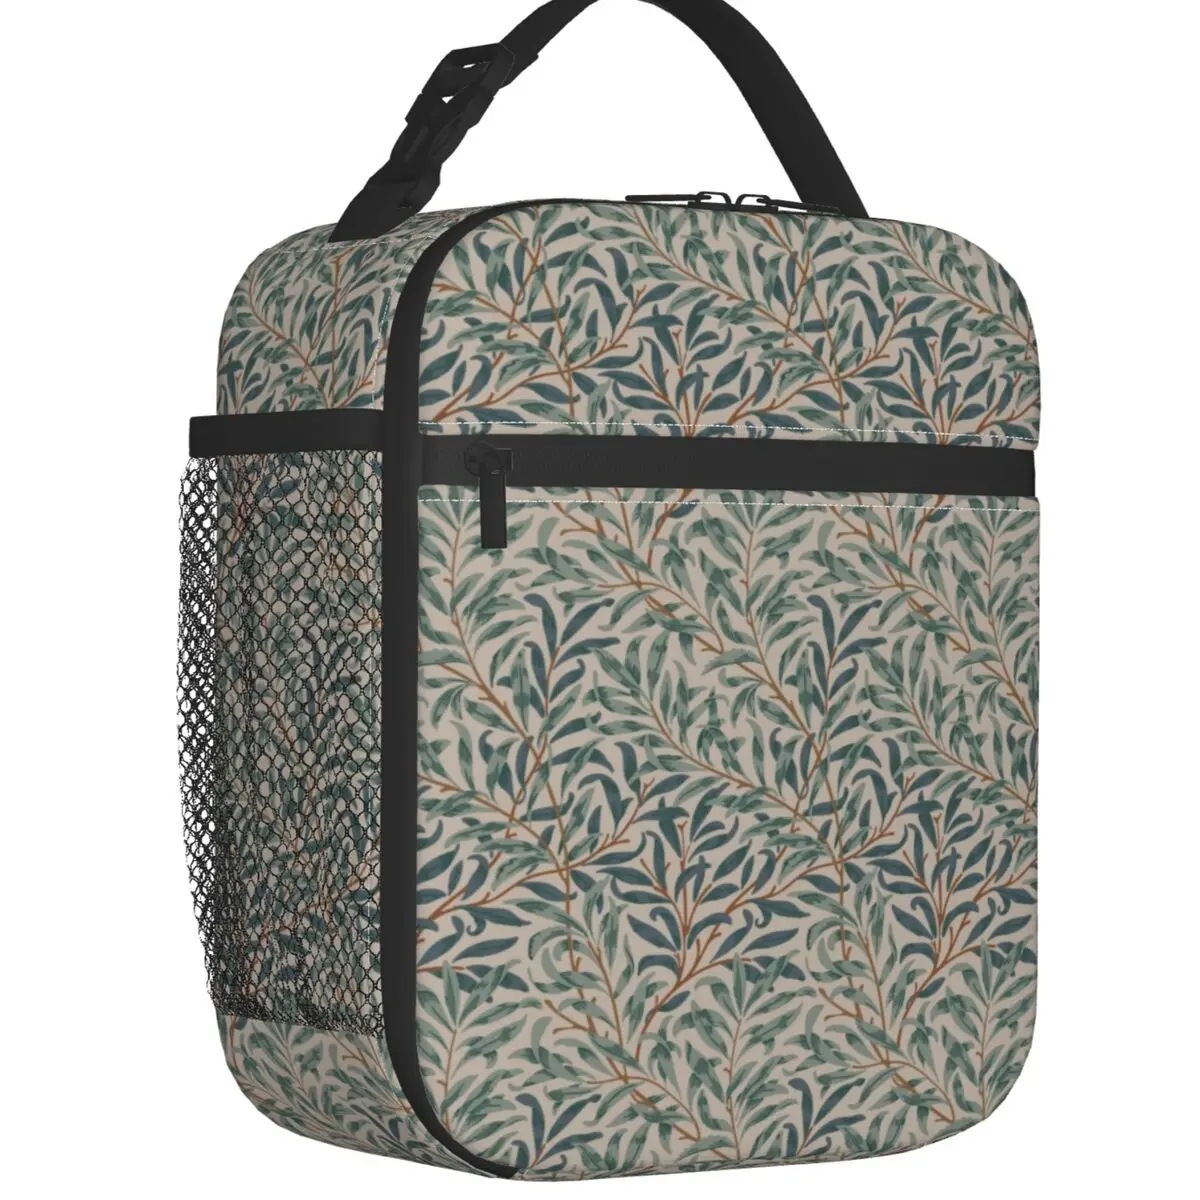 William Morris Vintage Willow Bough Portable Lunch Box Floral Textile Pattern Cooler Thermal Food Insulated Lunch Bag Work